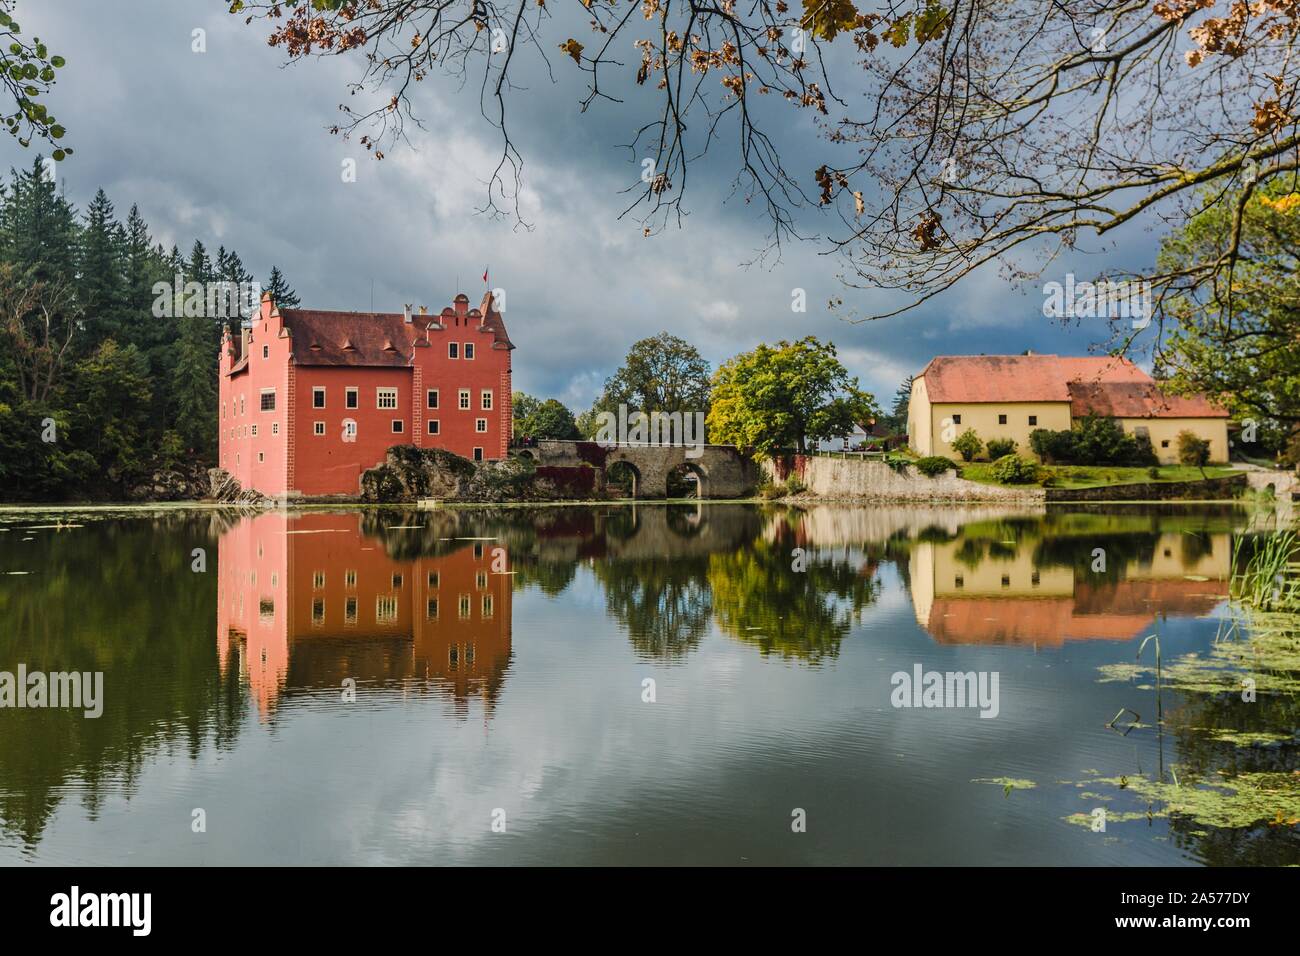 Cervena Lhota, Czech Republic - September 28 2019: View of famous red castle standing on a rock in the middle of a lake. Sunny day and blue sky. Stock Photo